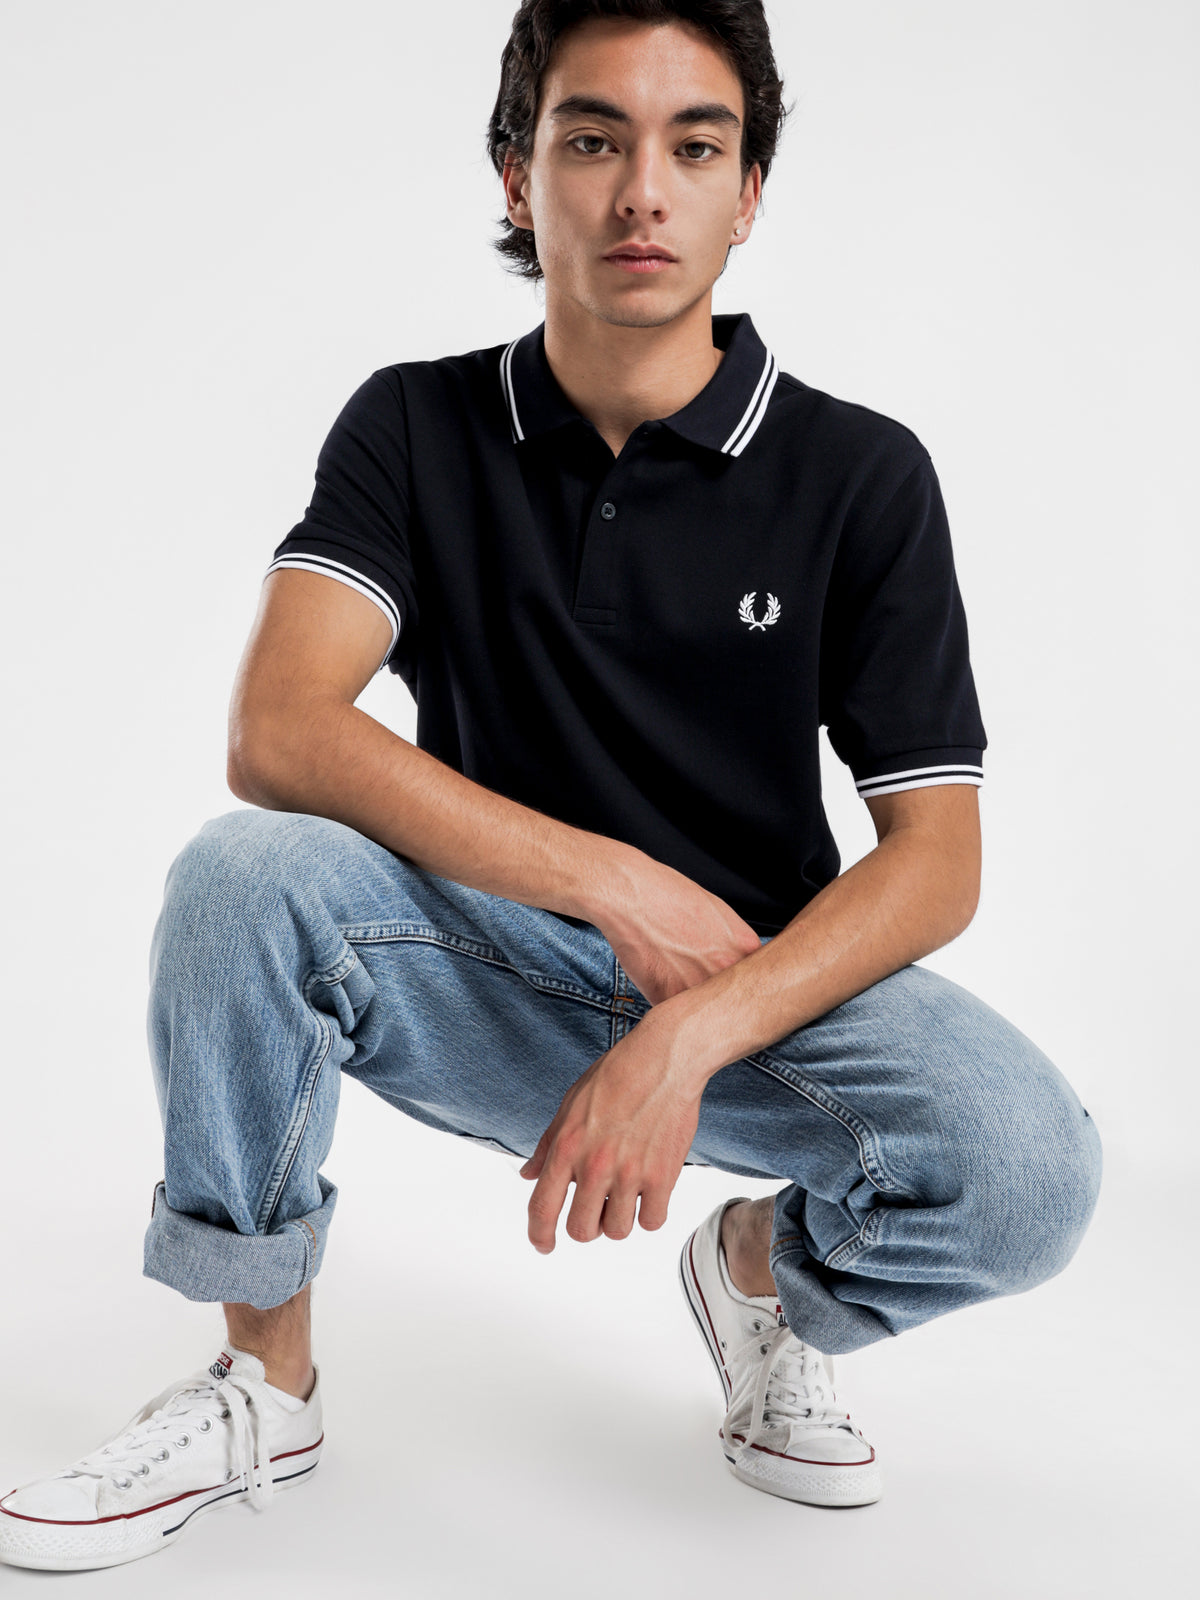 Twin Tipped Fred Perry T-Shirt in Navy &amp; White